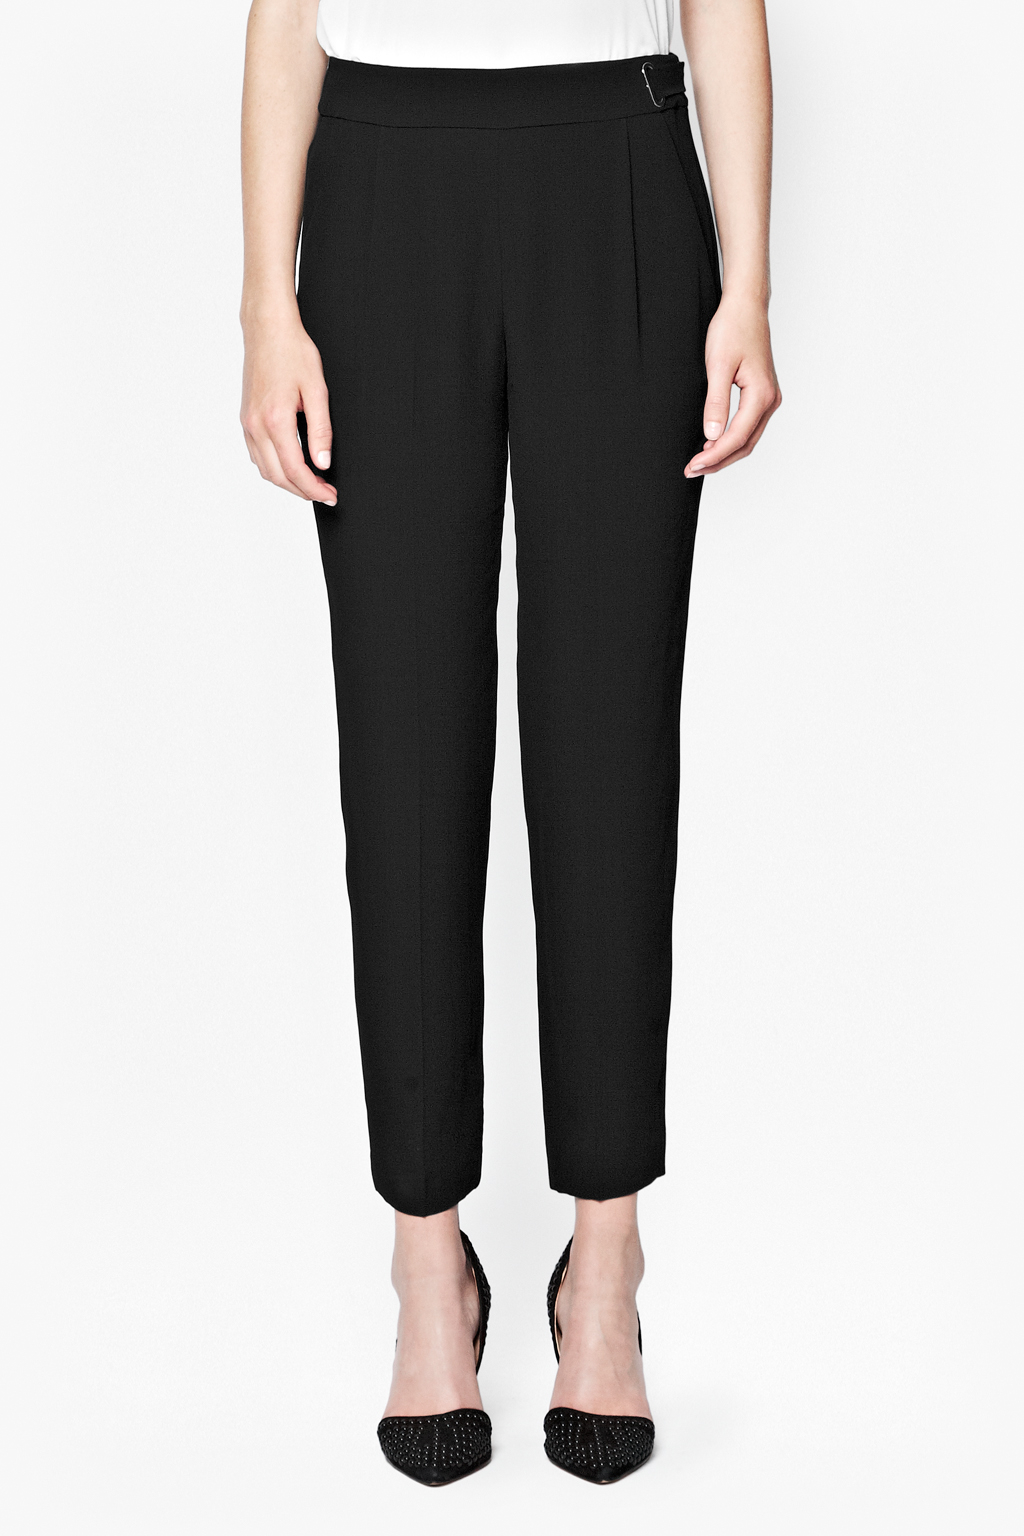 French connection Emmeline Peg Leg Trousers in Black | Lyst